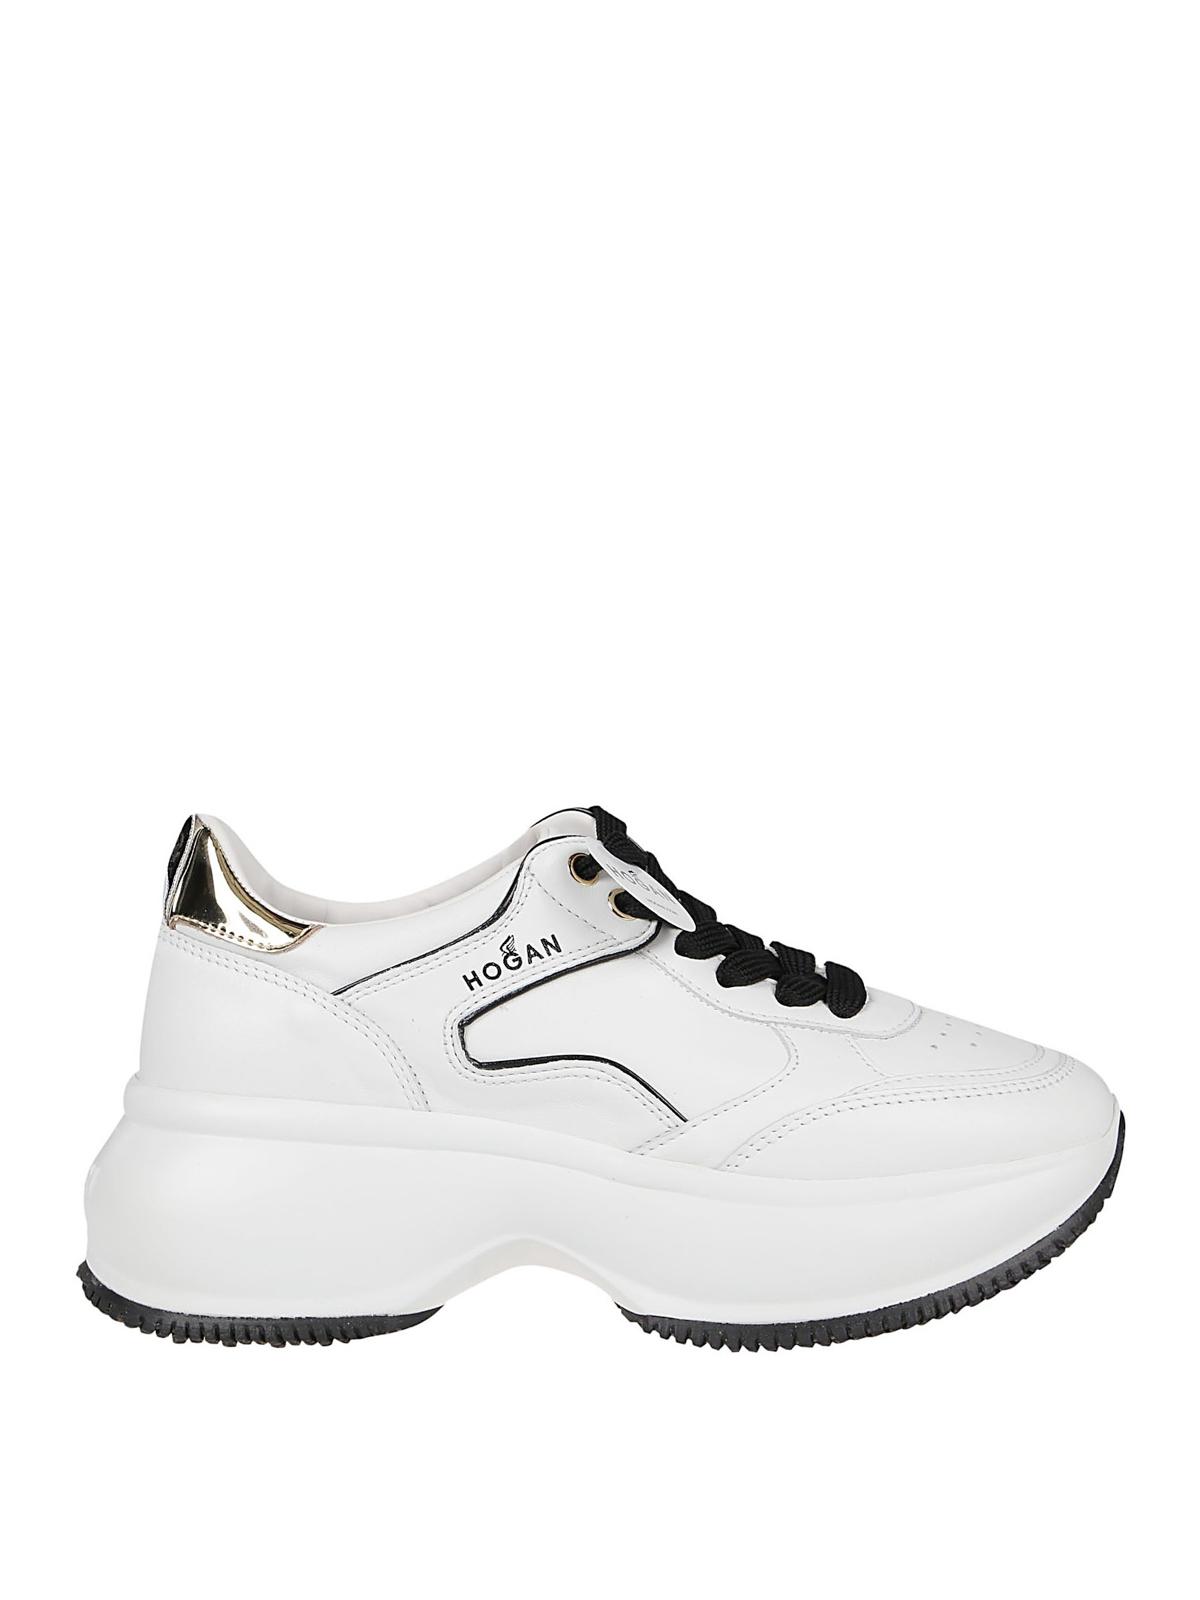 Hogan Leather Maxi 1 Active White Sneakers for Men - Lyst